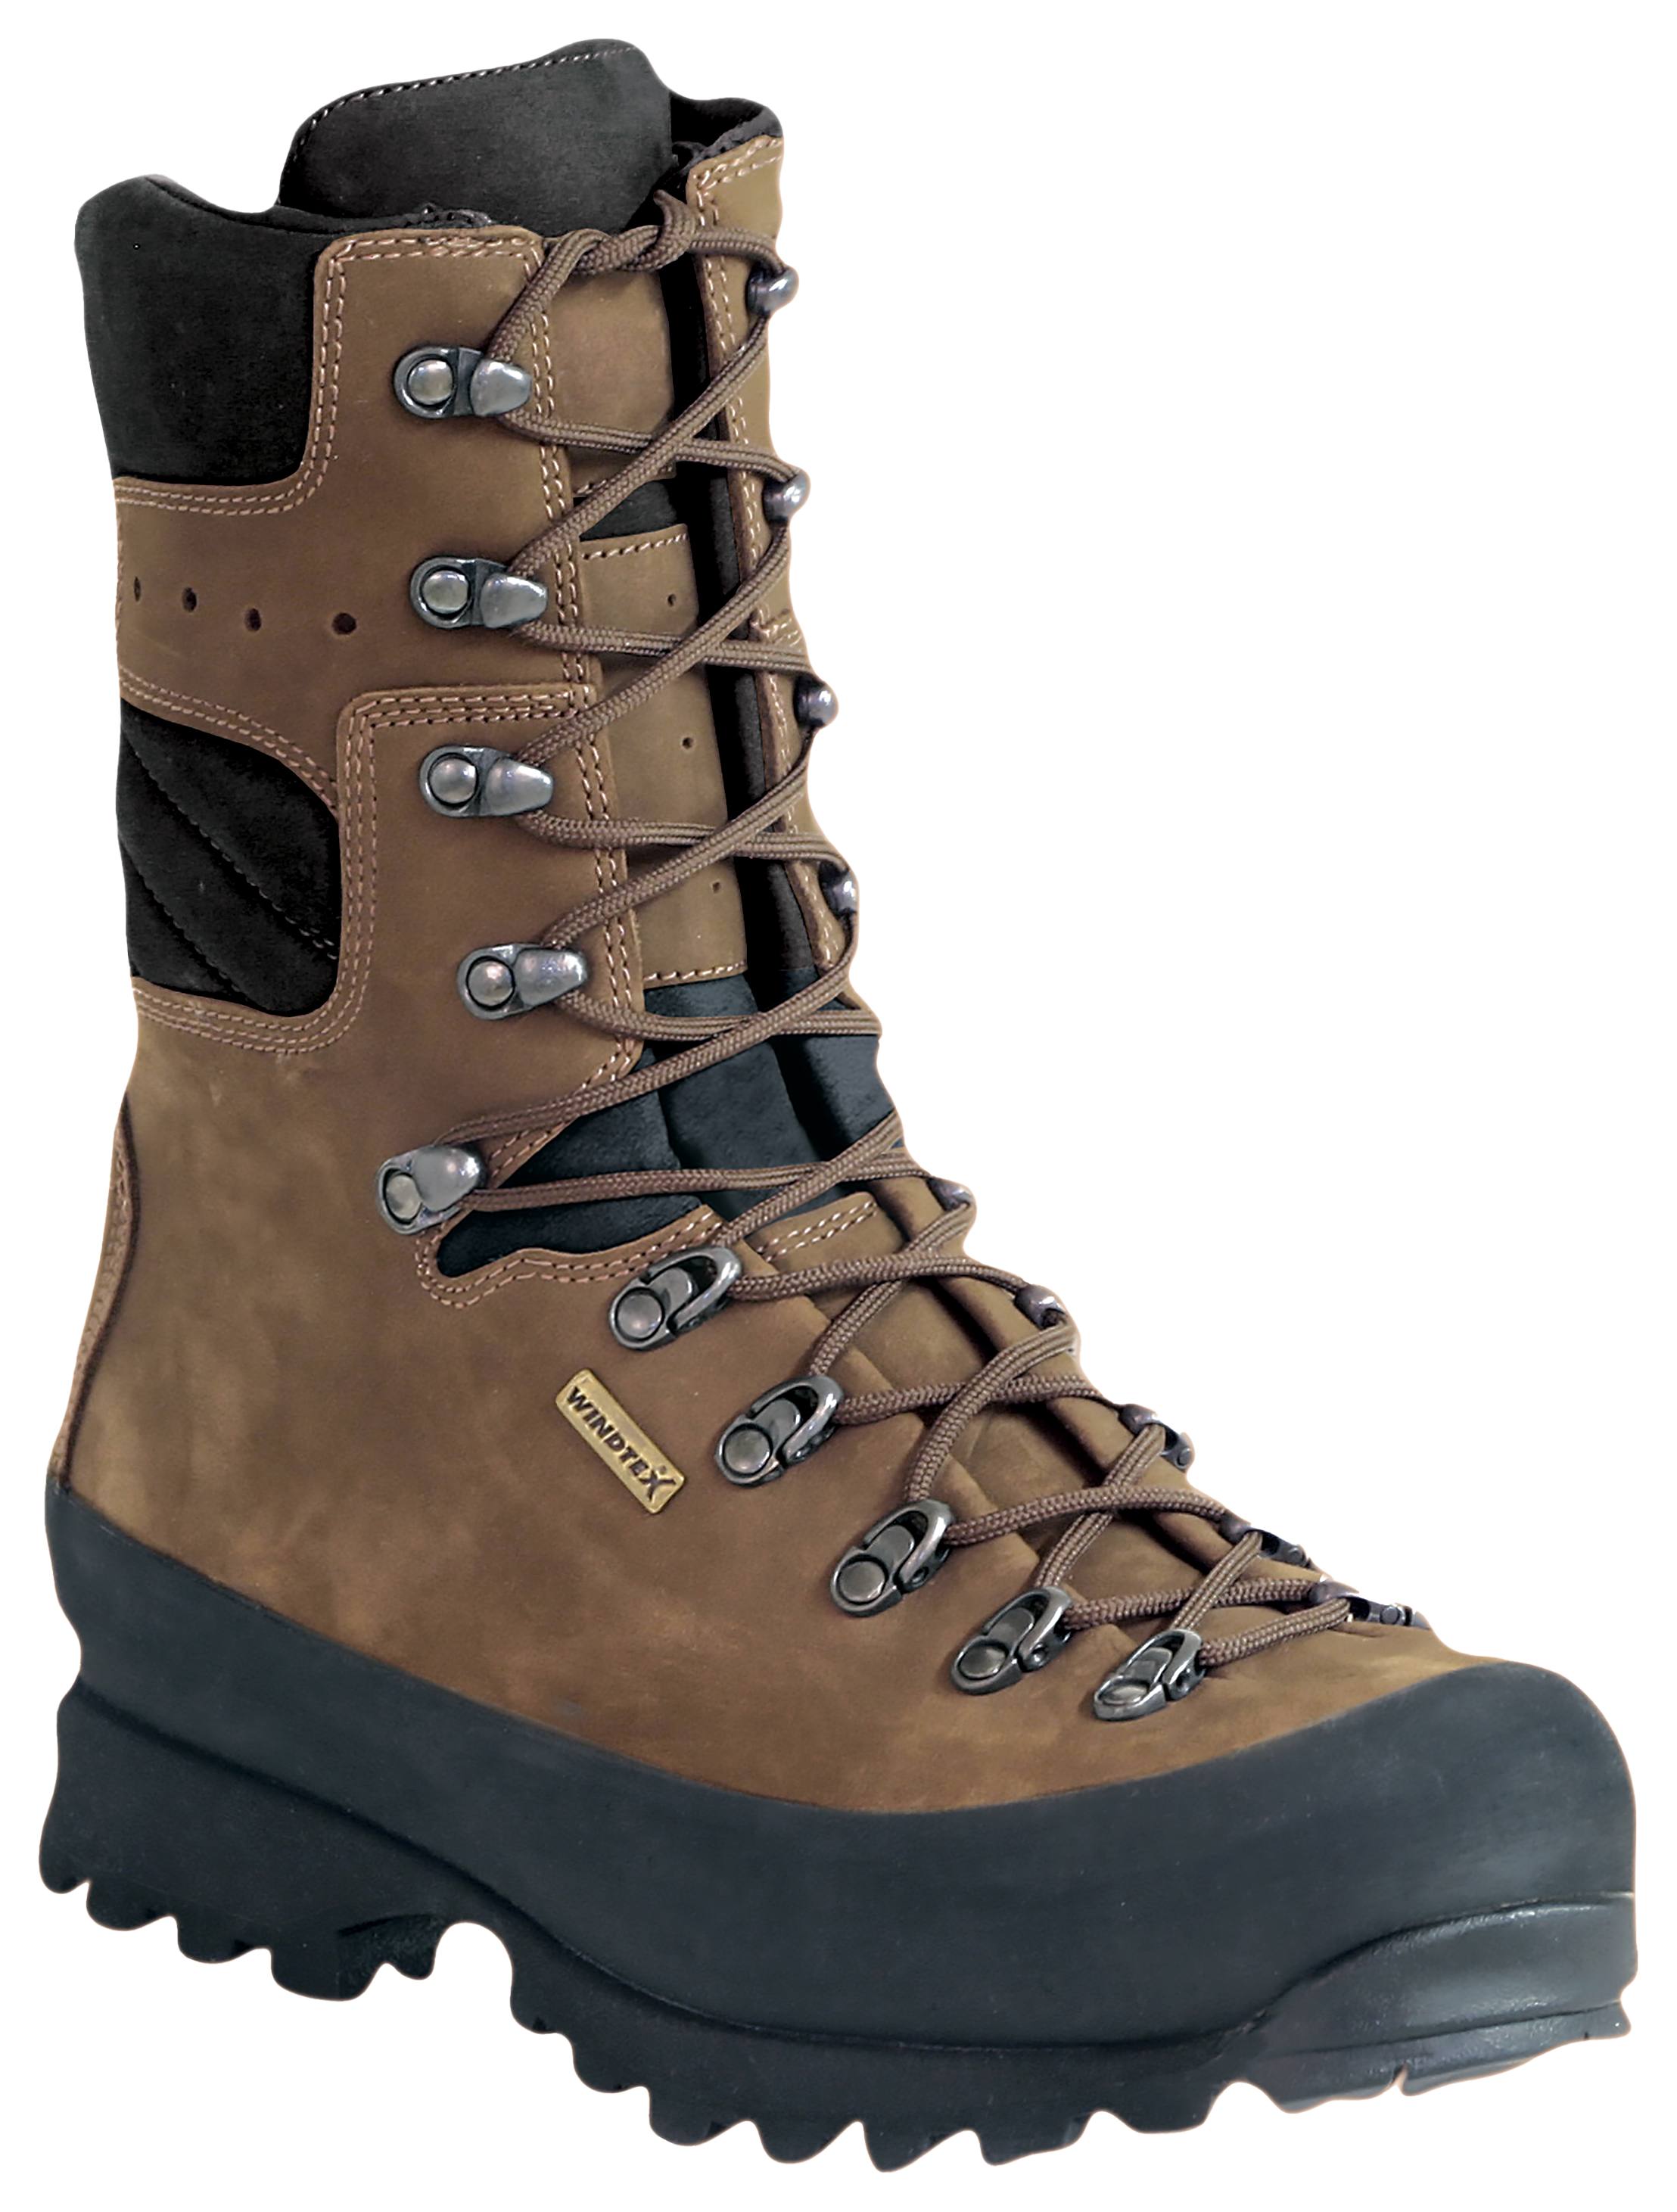 Kenetrek Mountain Extreme 1000 Insulated Waterproof Hunting Boots for Men - Brown - 11 5M